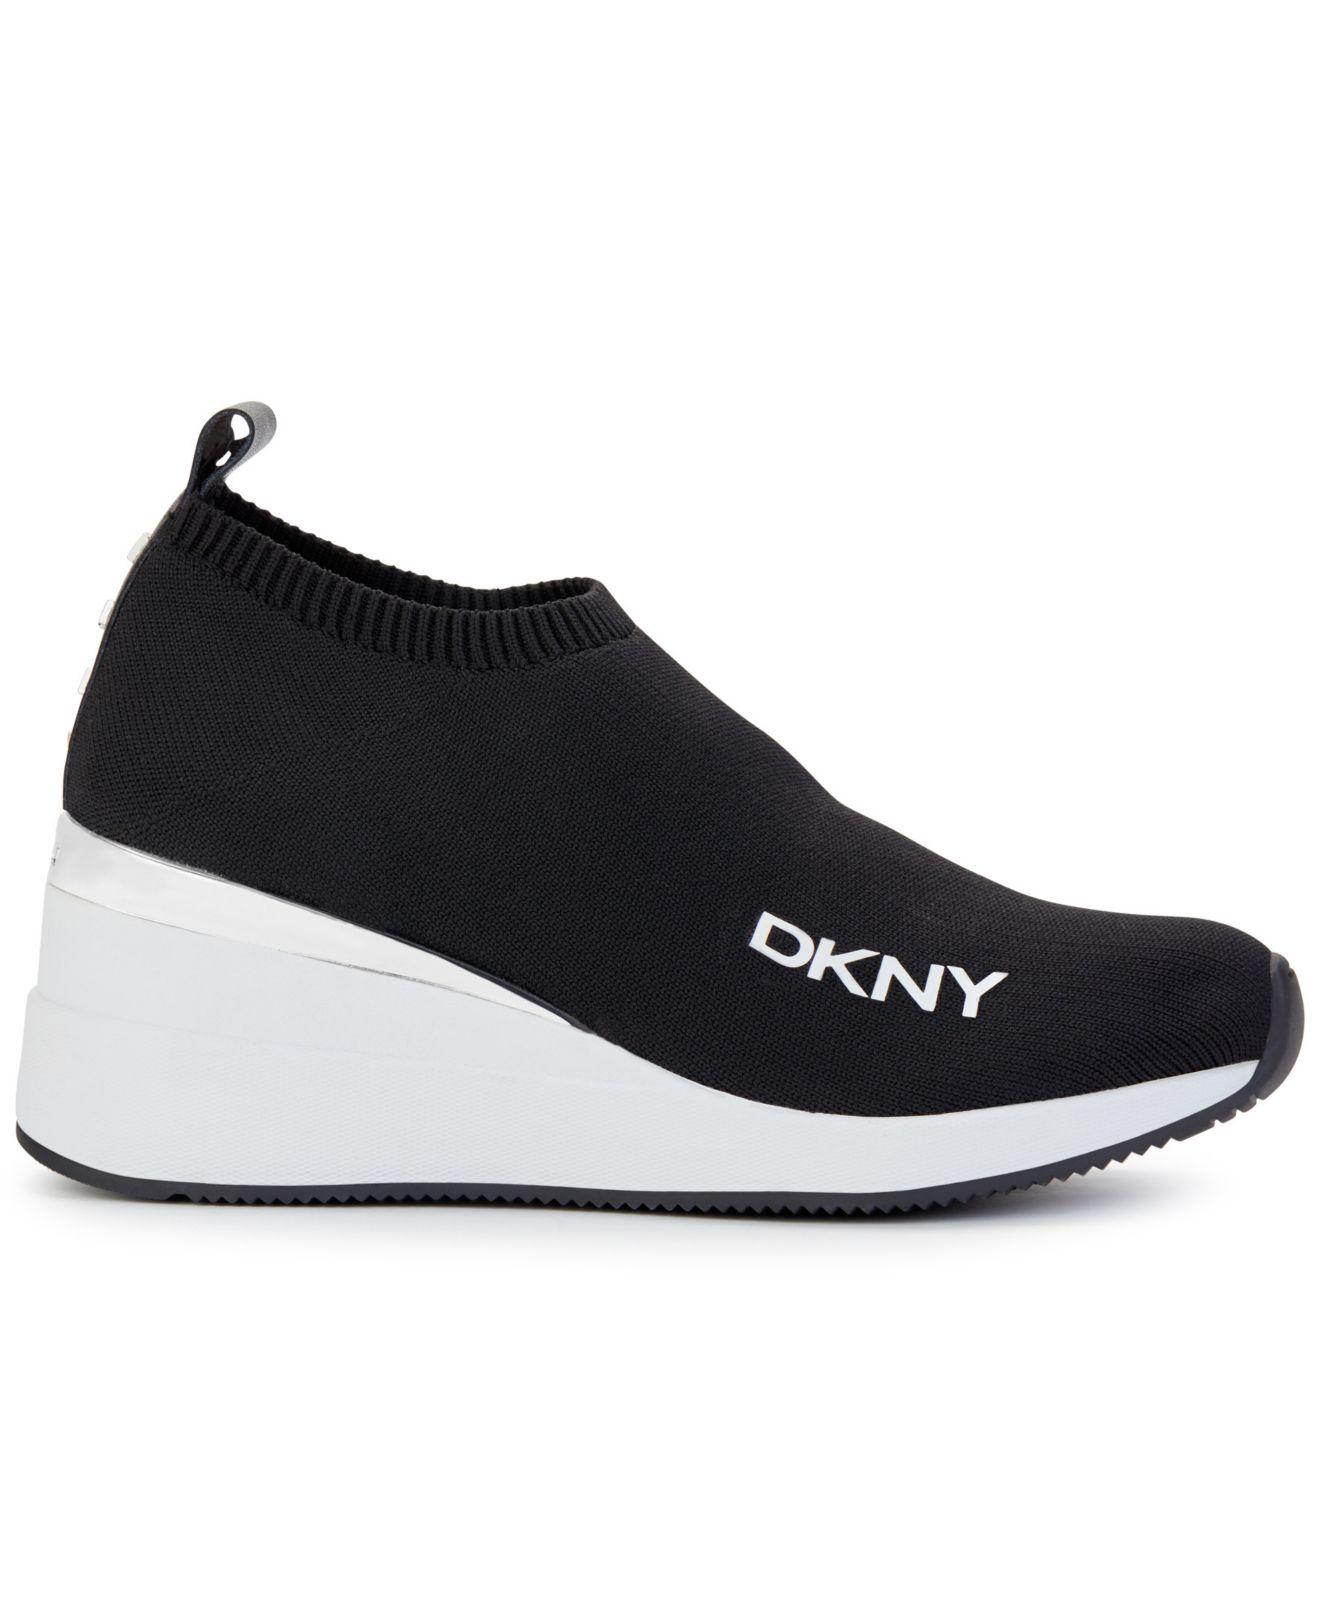 DKNY Leather Parks Slip-on Wedge Sneakers in Black - Lyst